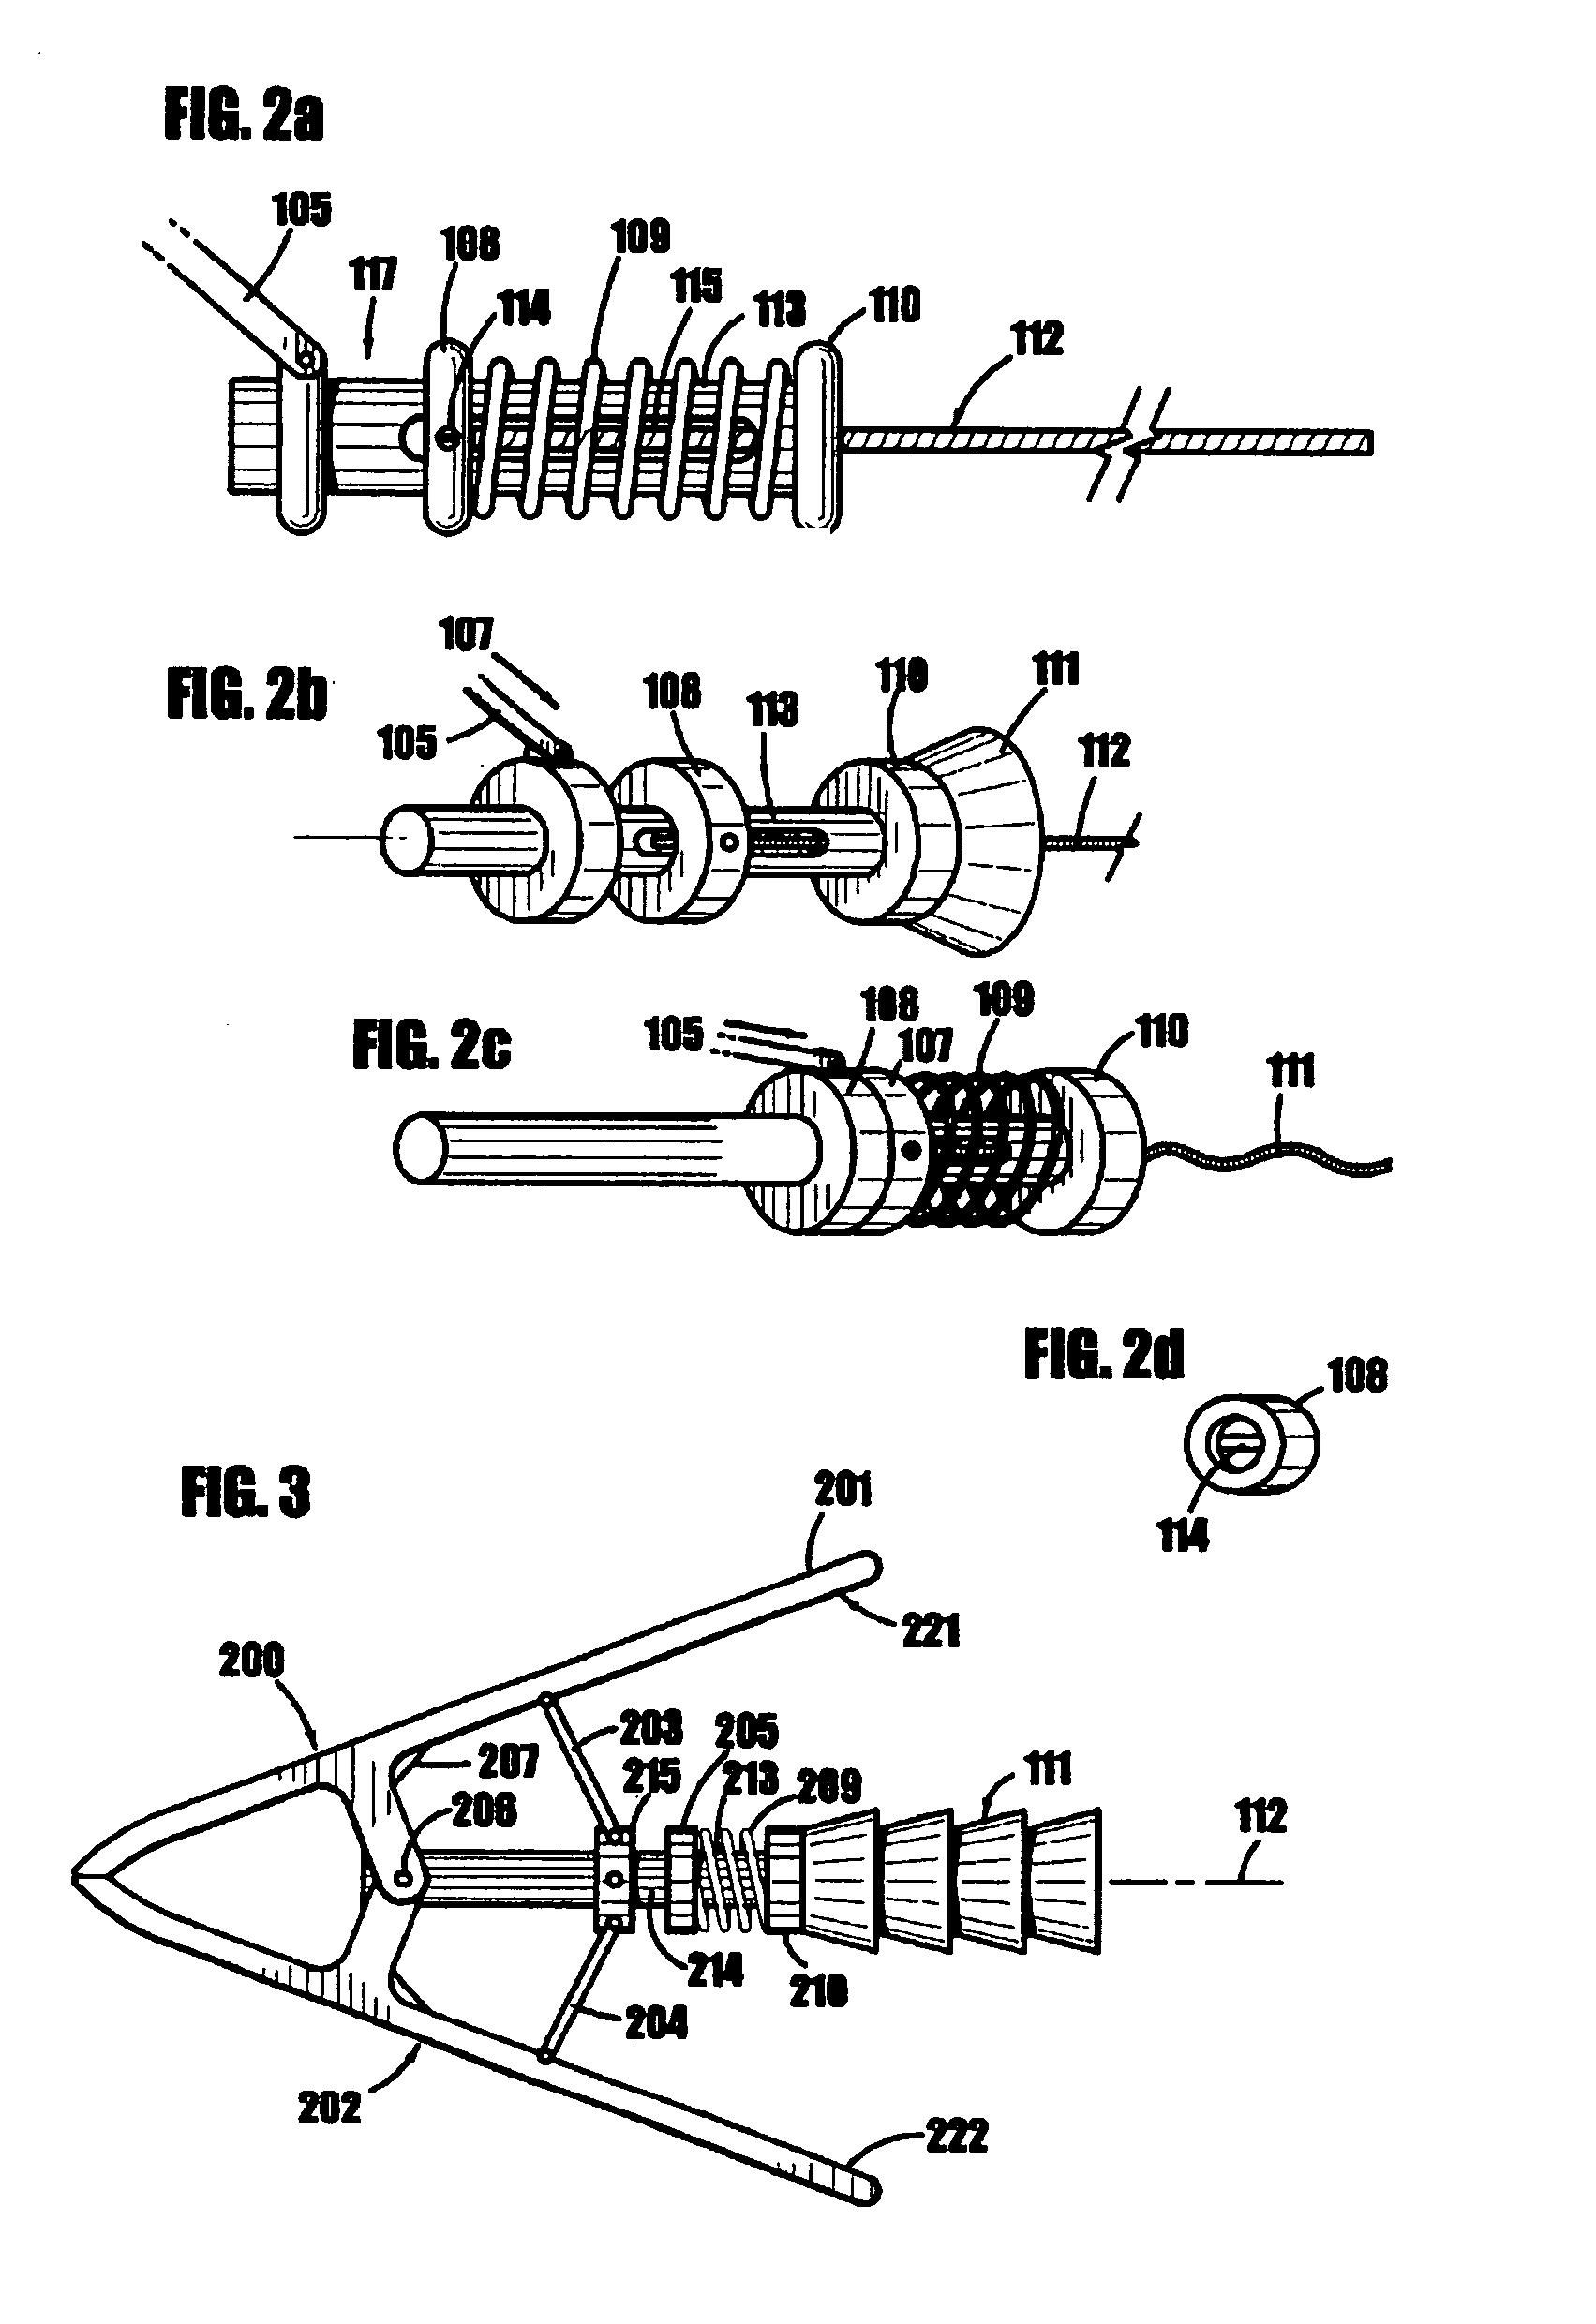 Clamping device with flexible arm